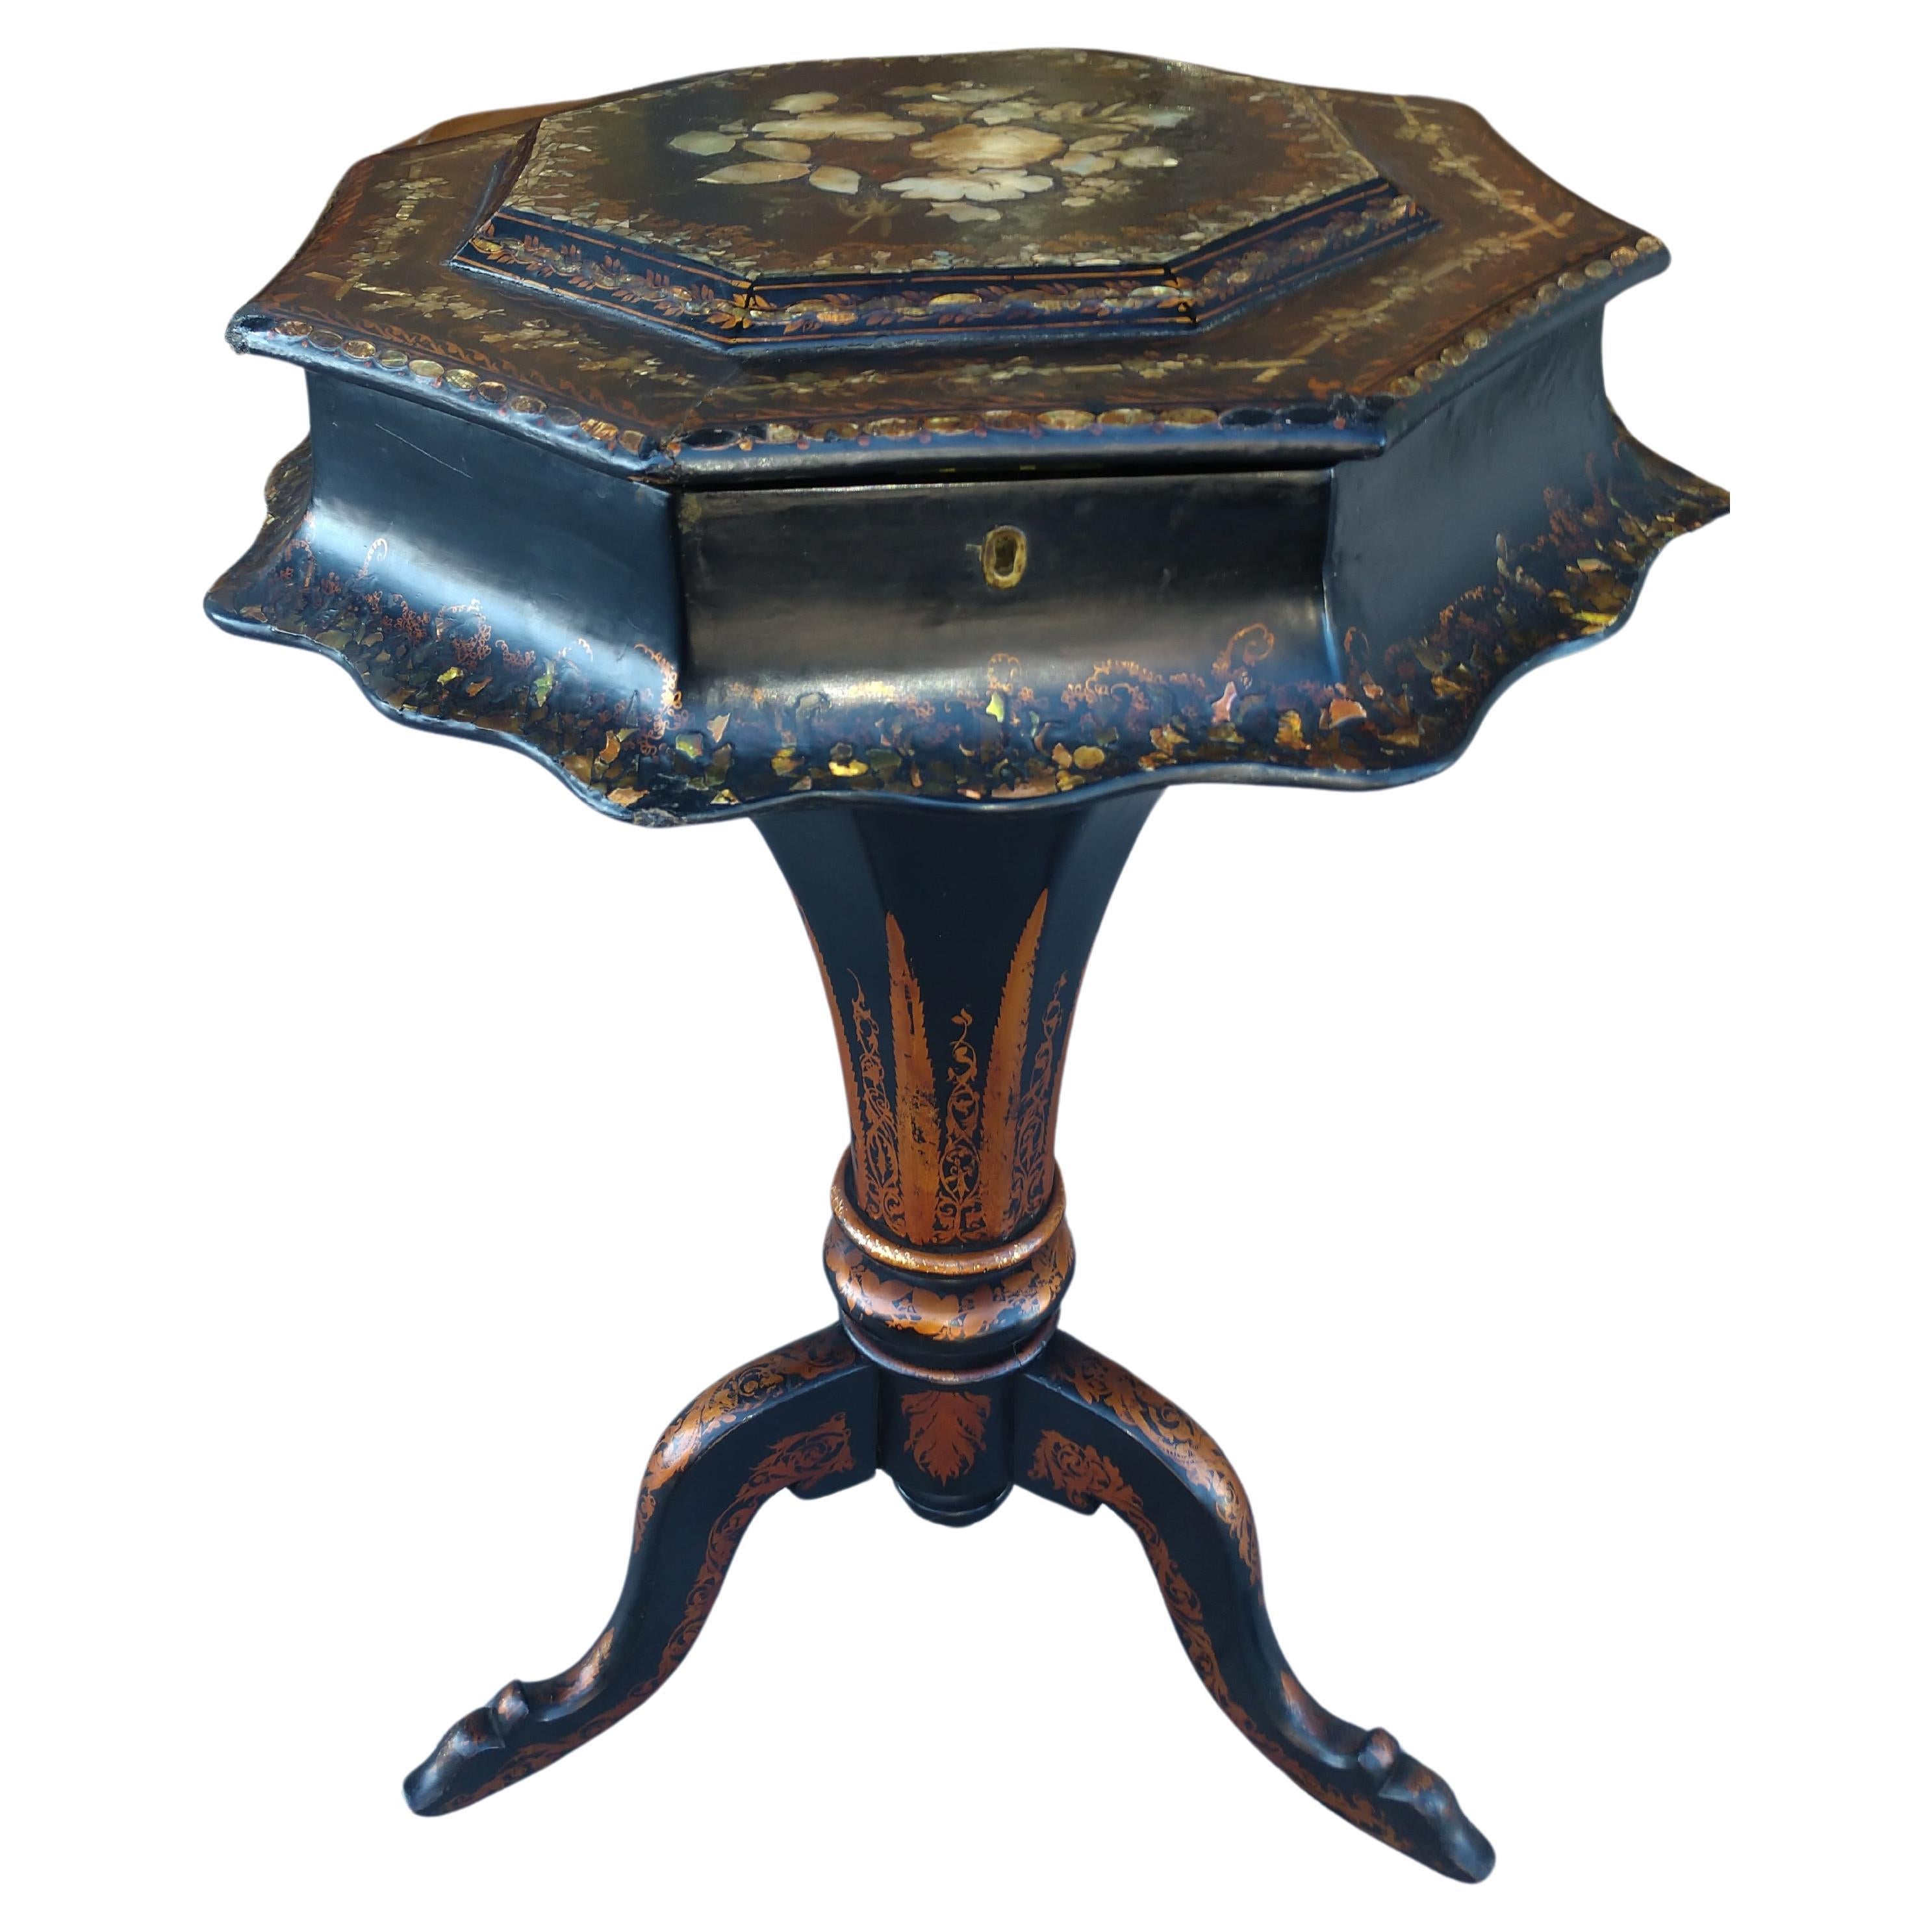 Victorian Sewing Stand with Mother of Pearl and Stenciling